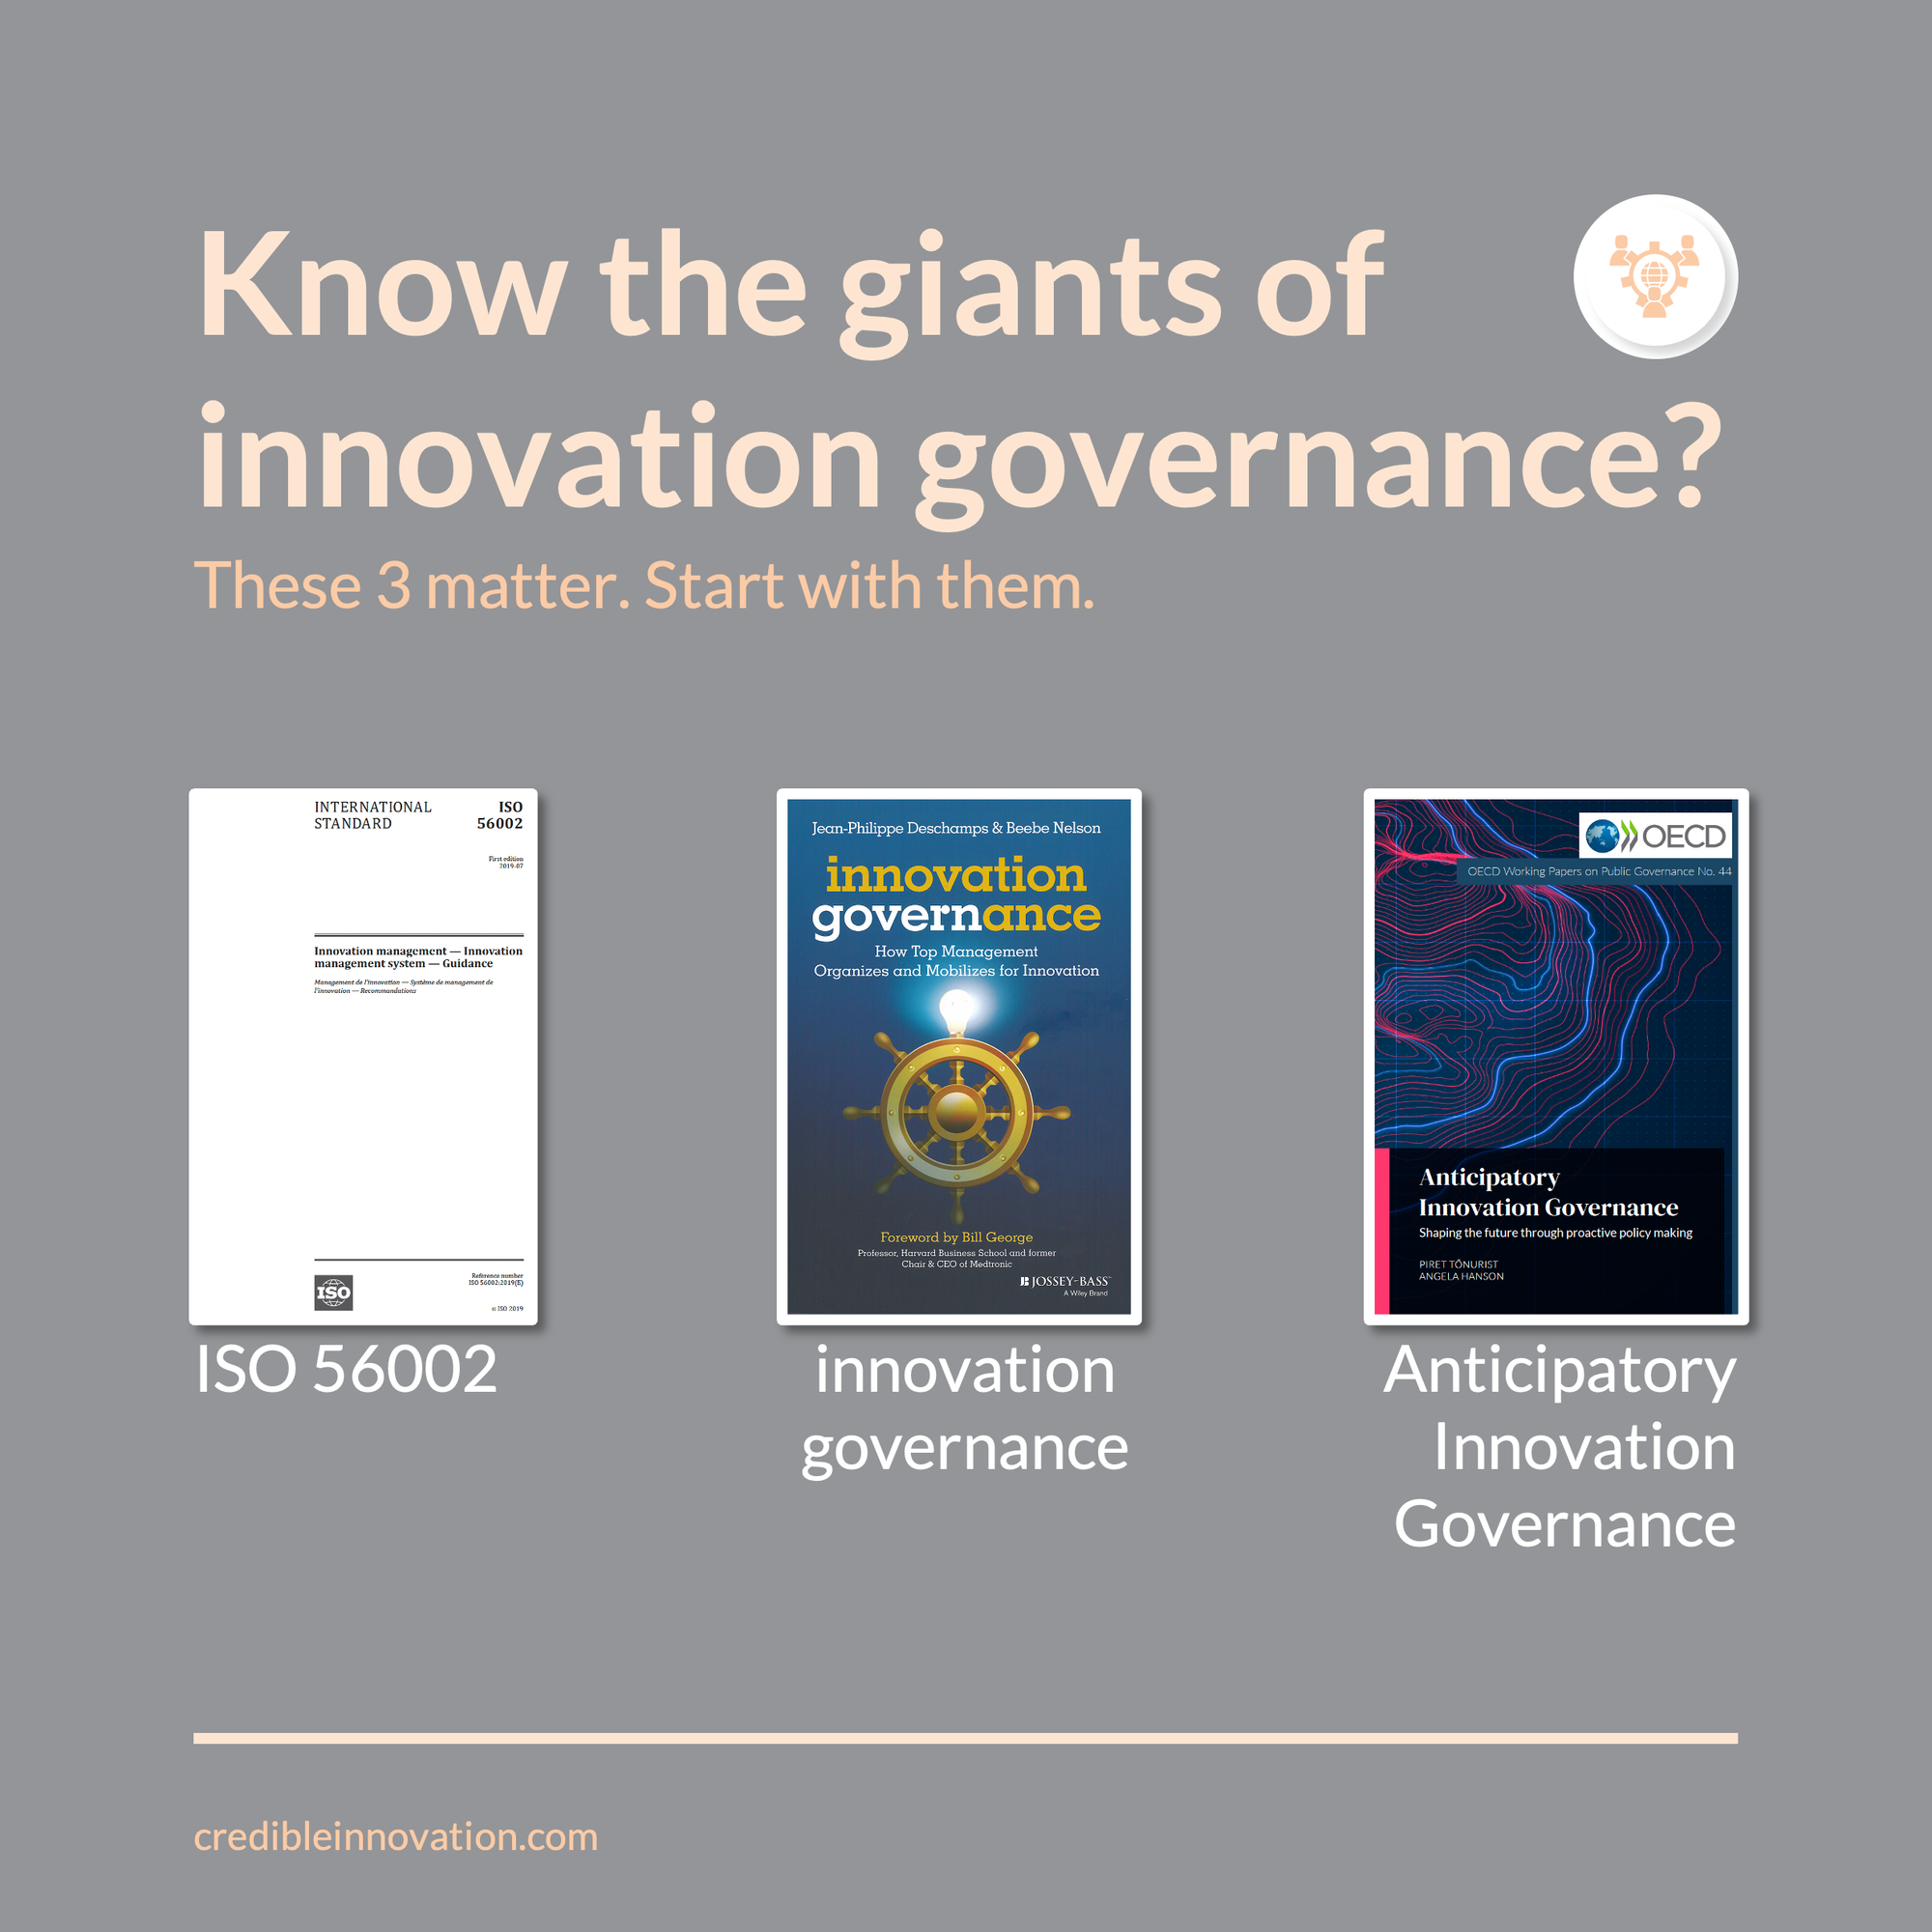 A visual showing the covers of three sources - "ISO 56002" standard, "innovation governance" book, and "Anticipatory Innovation Governance" paper